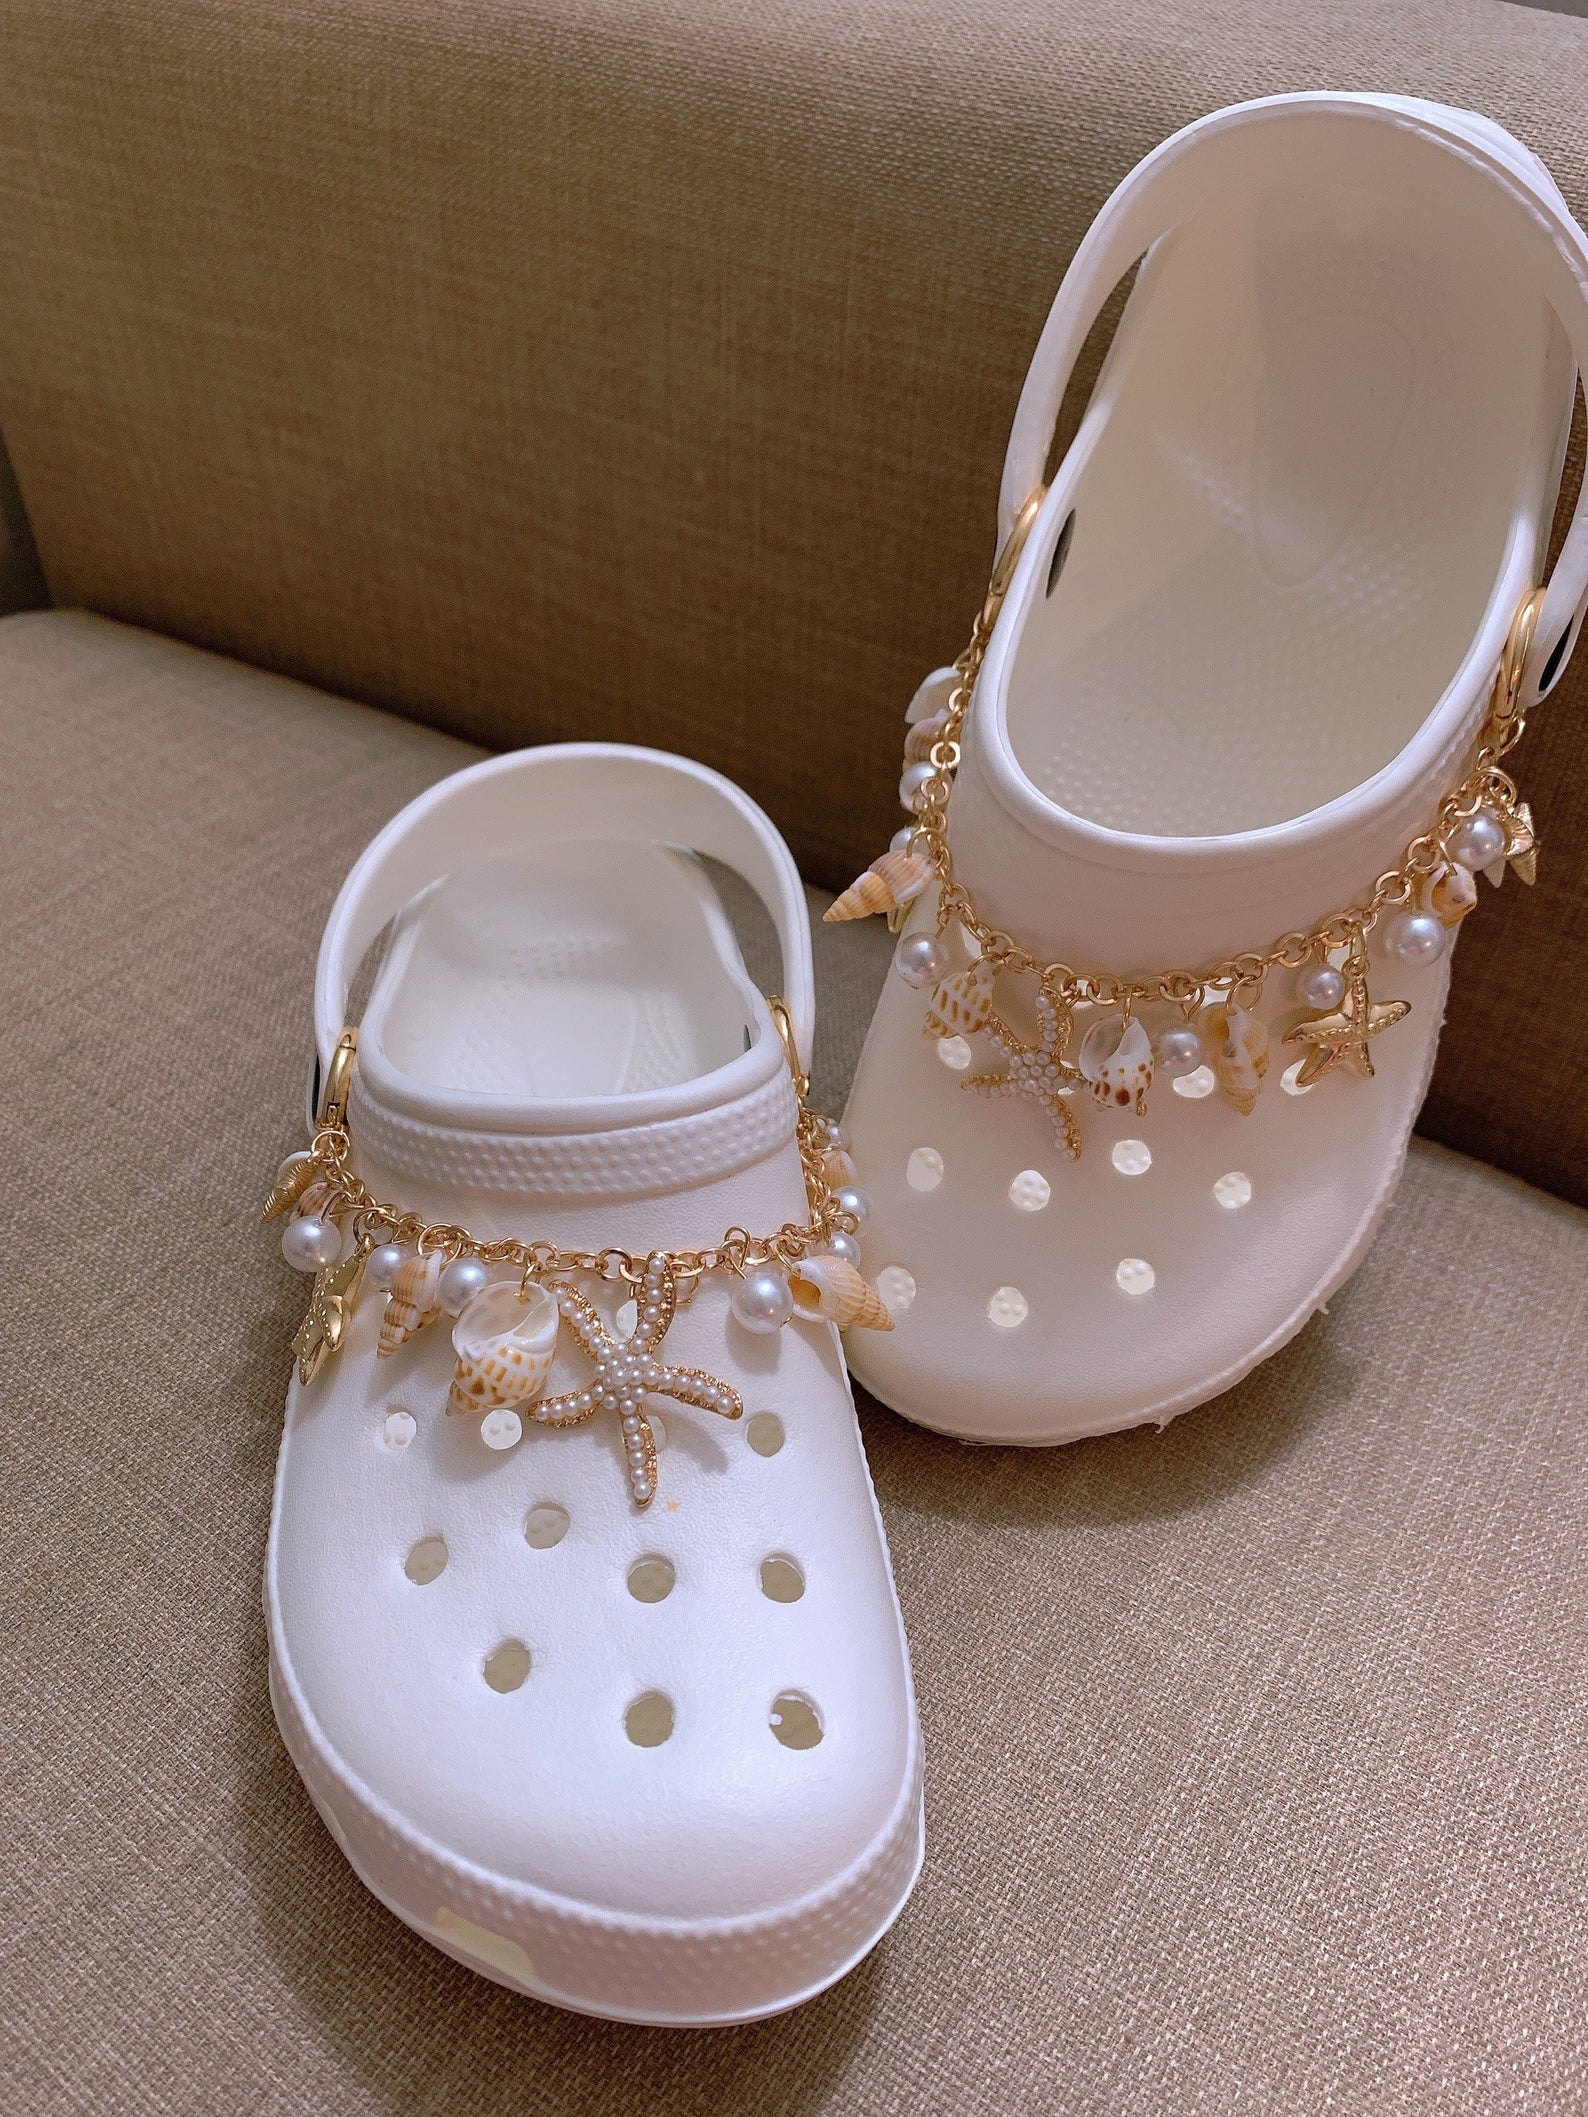 cheer crocs with bling - Lemon8 Search